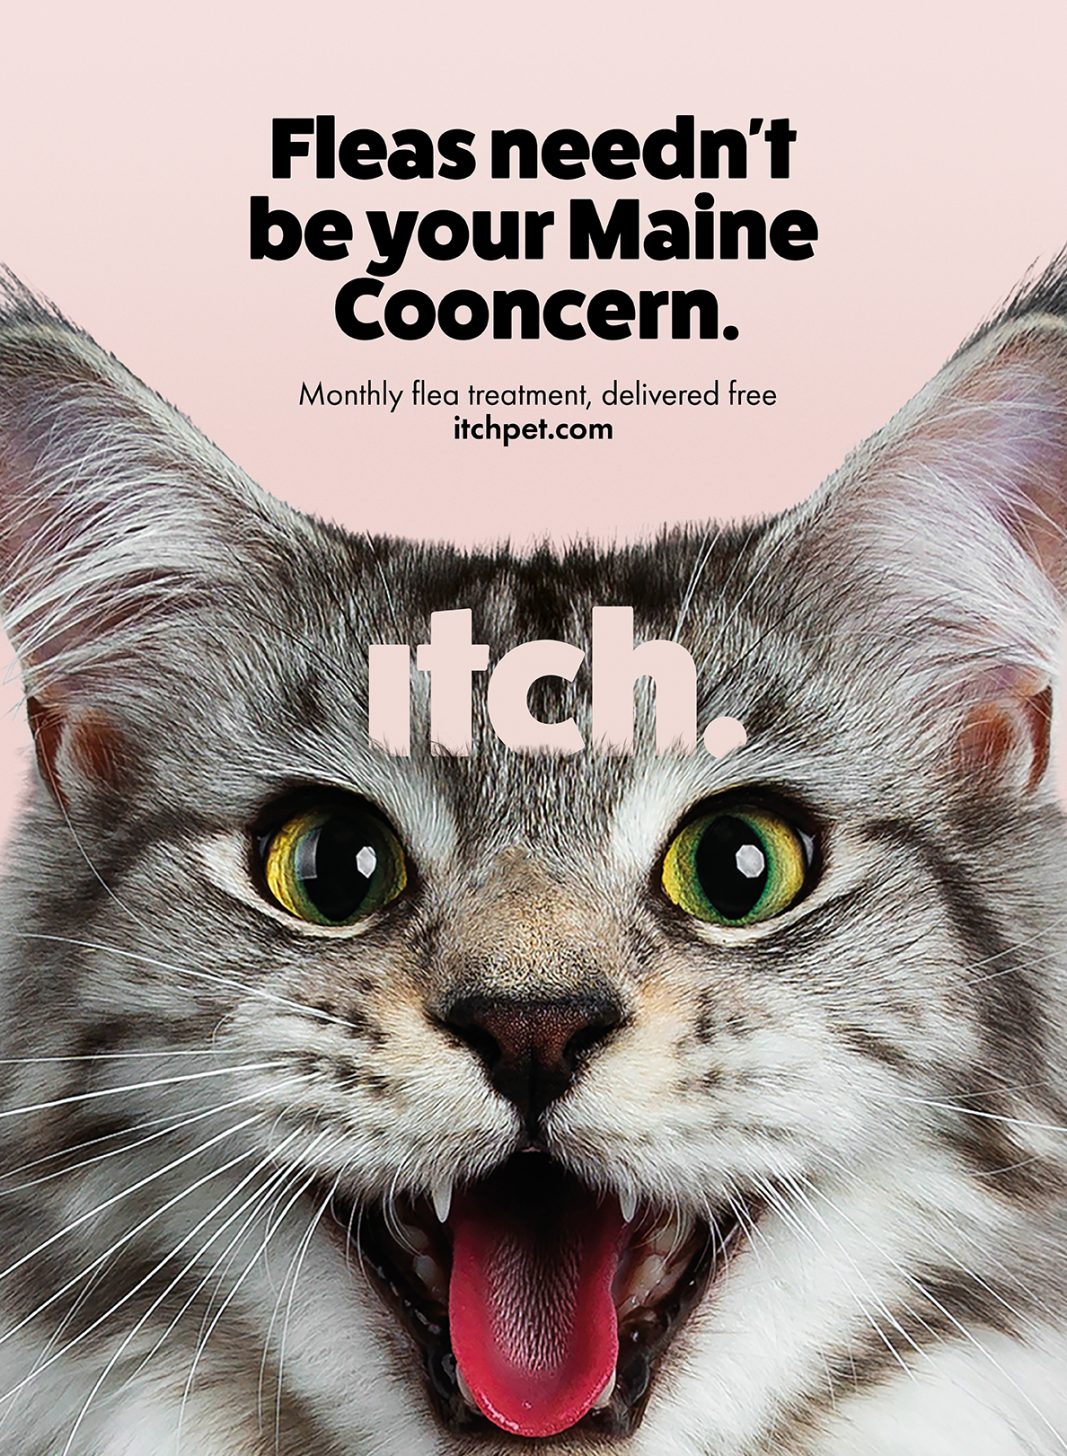 ITCH debuts first advertising campaign from NOW – Marketing ...